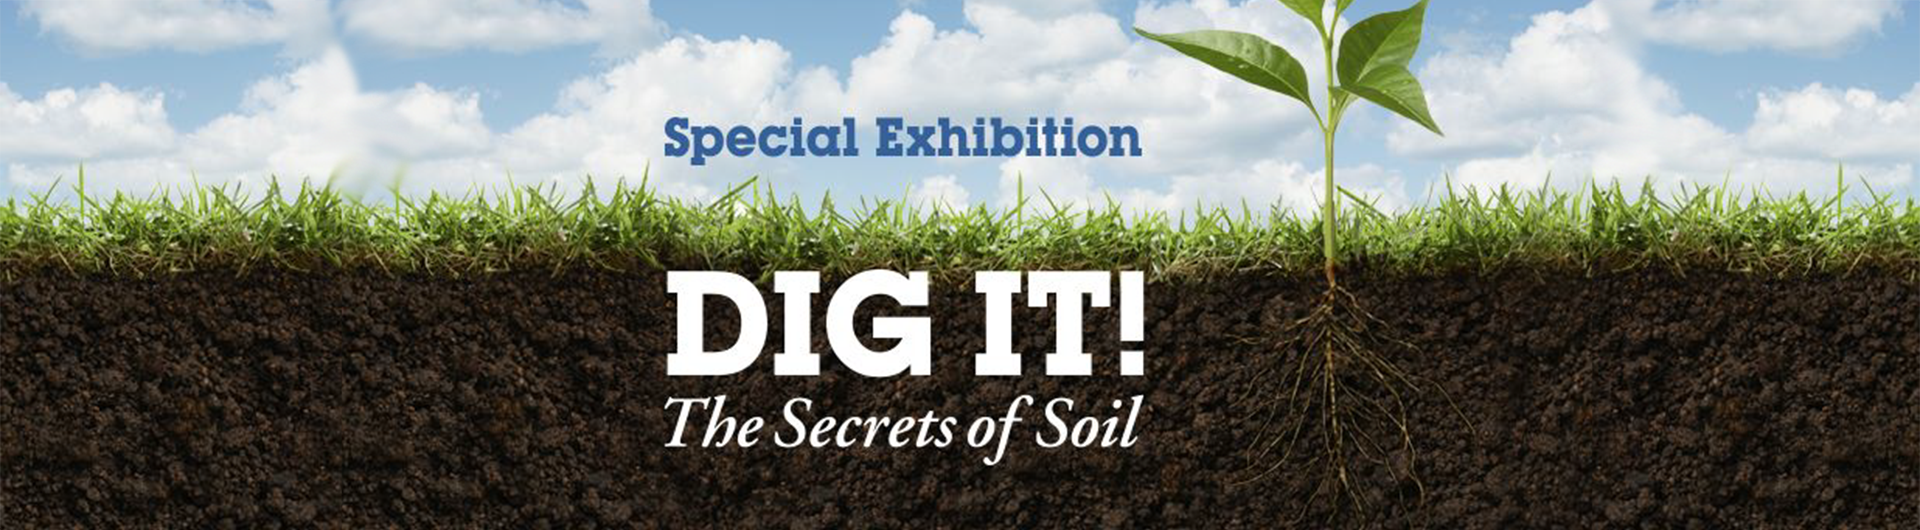 Special Exhibition - Dig It! The Secrets of Soil